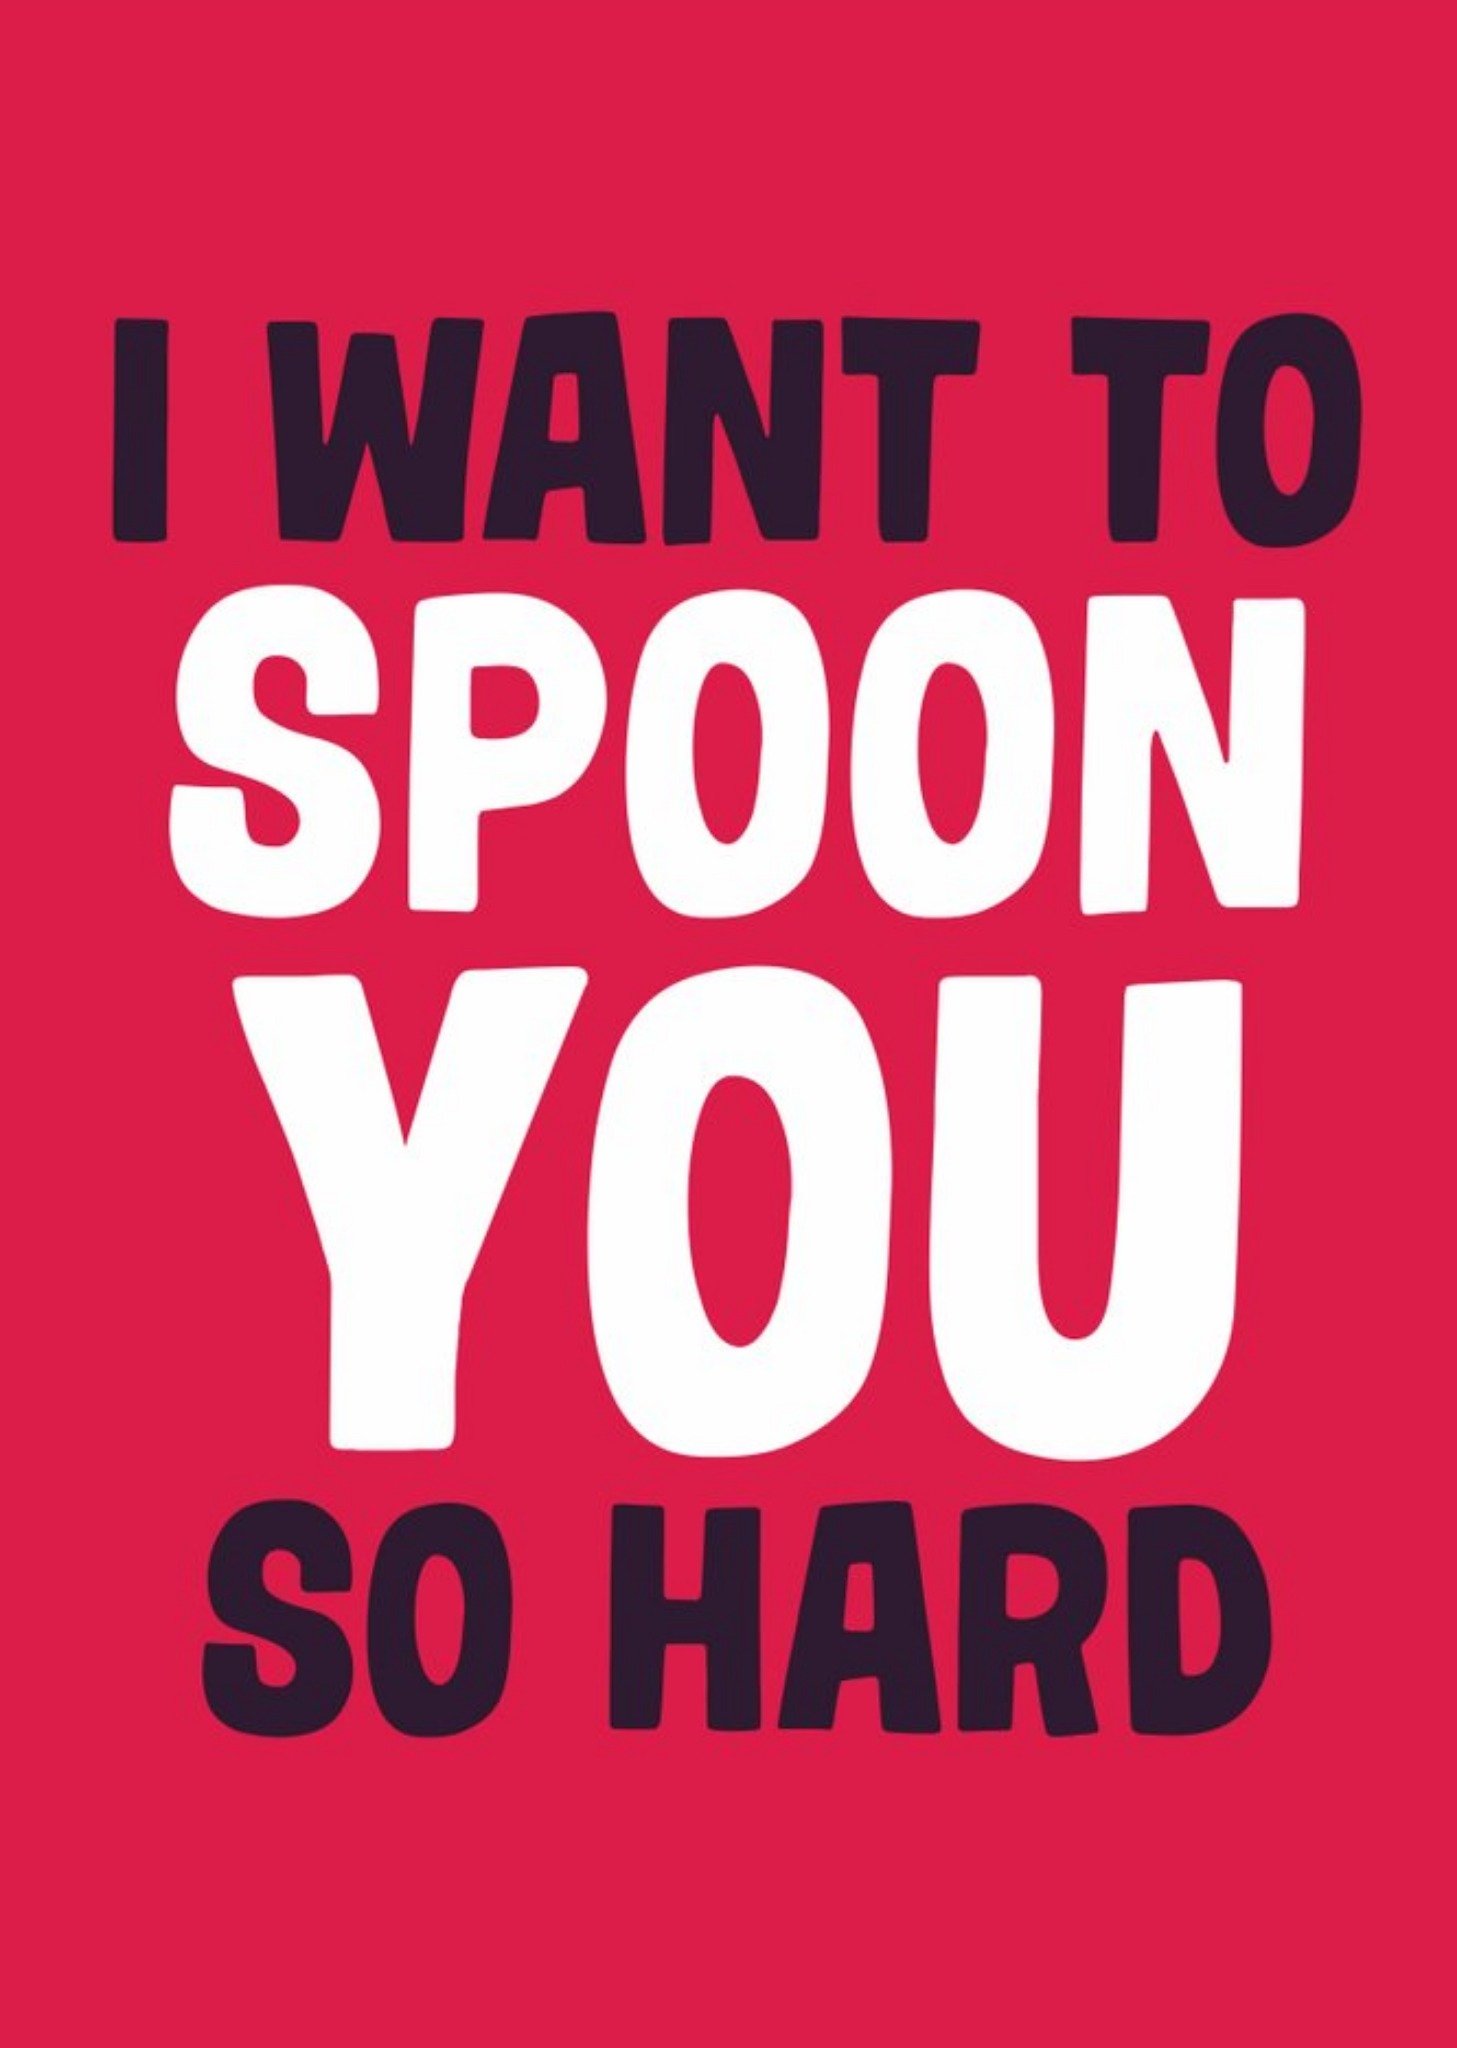 Moonpig Dean Morris Spoon You So Hard Funny Valentine's Day Card, Large